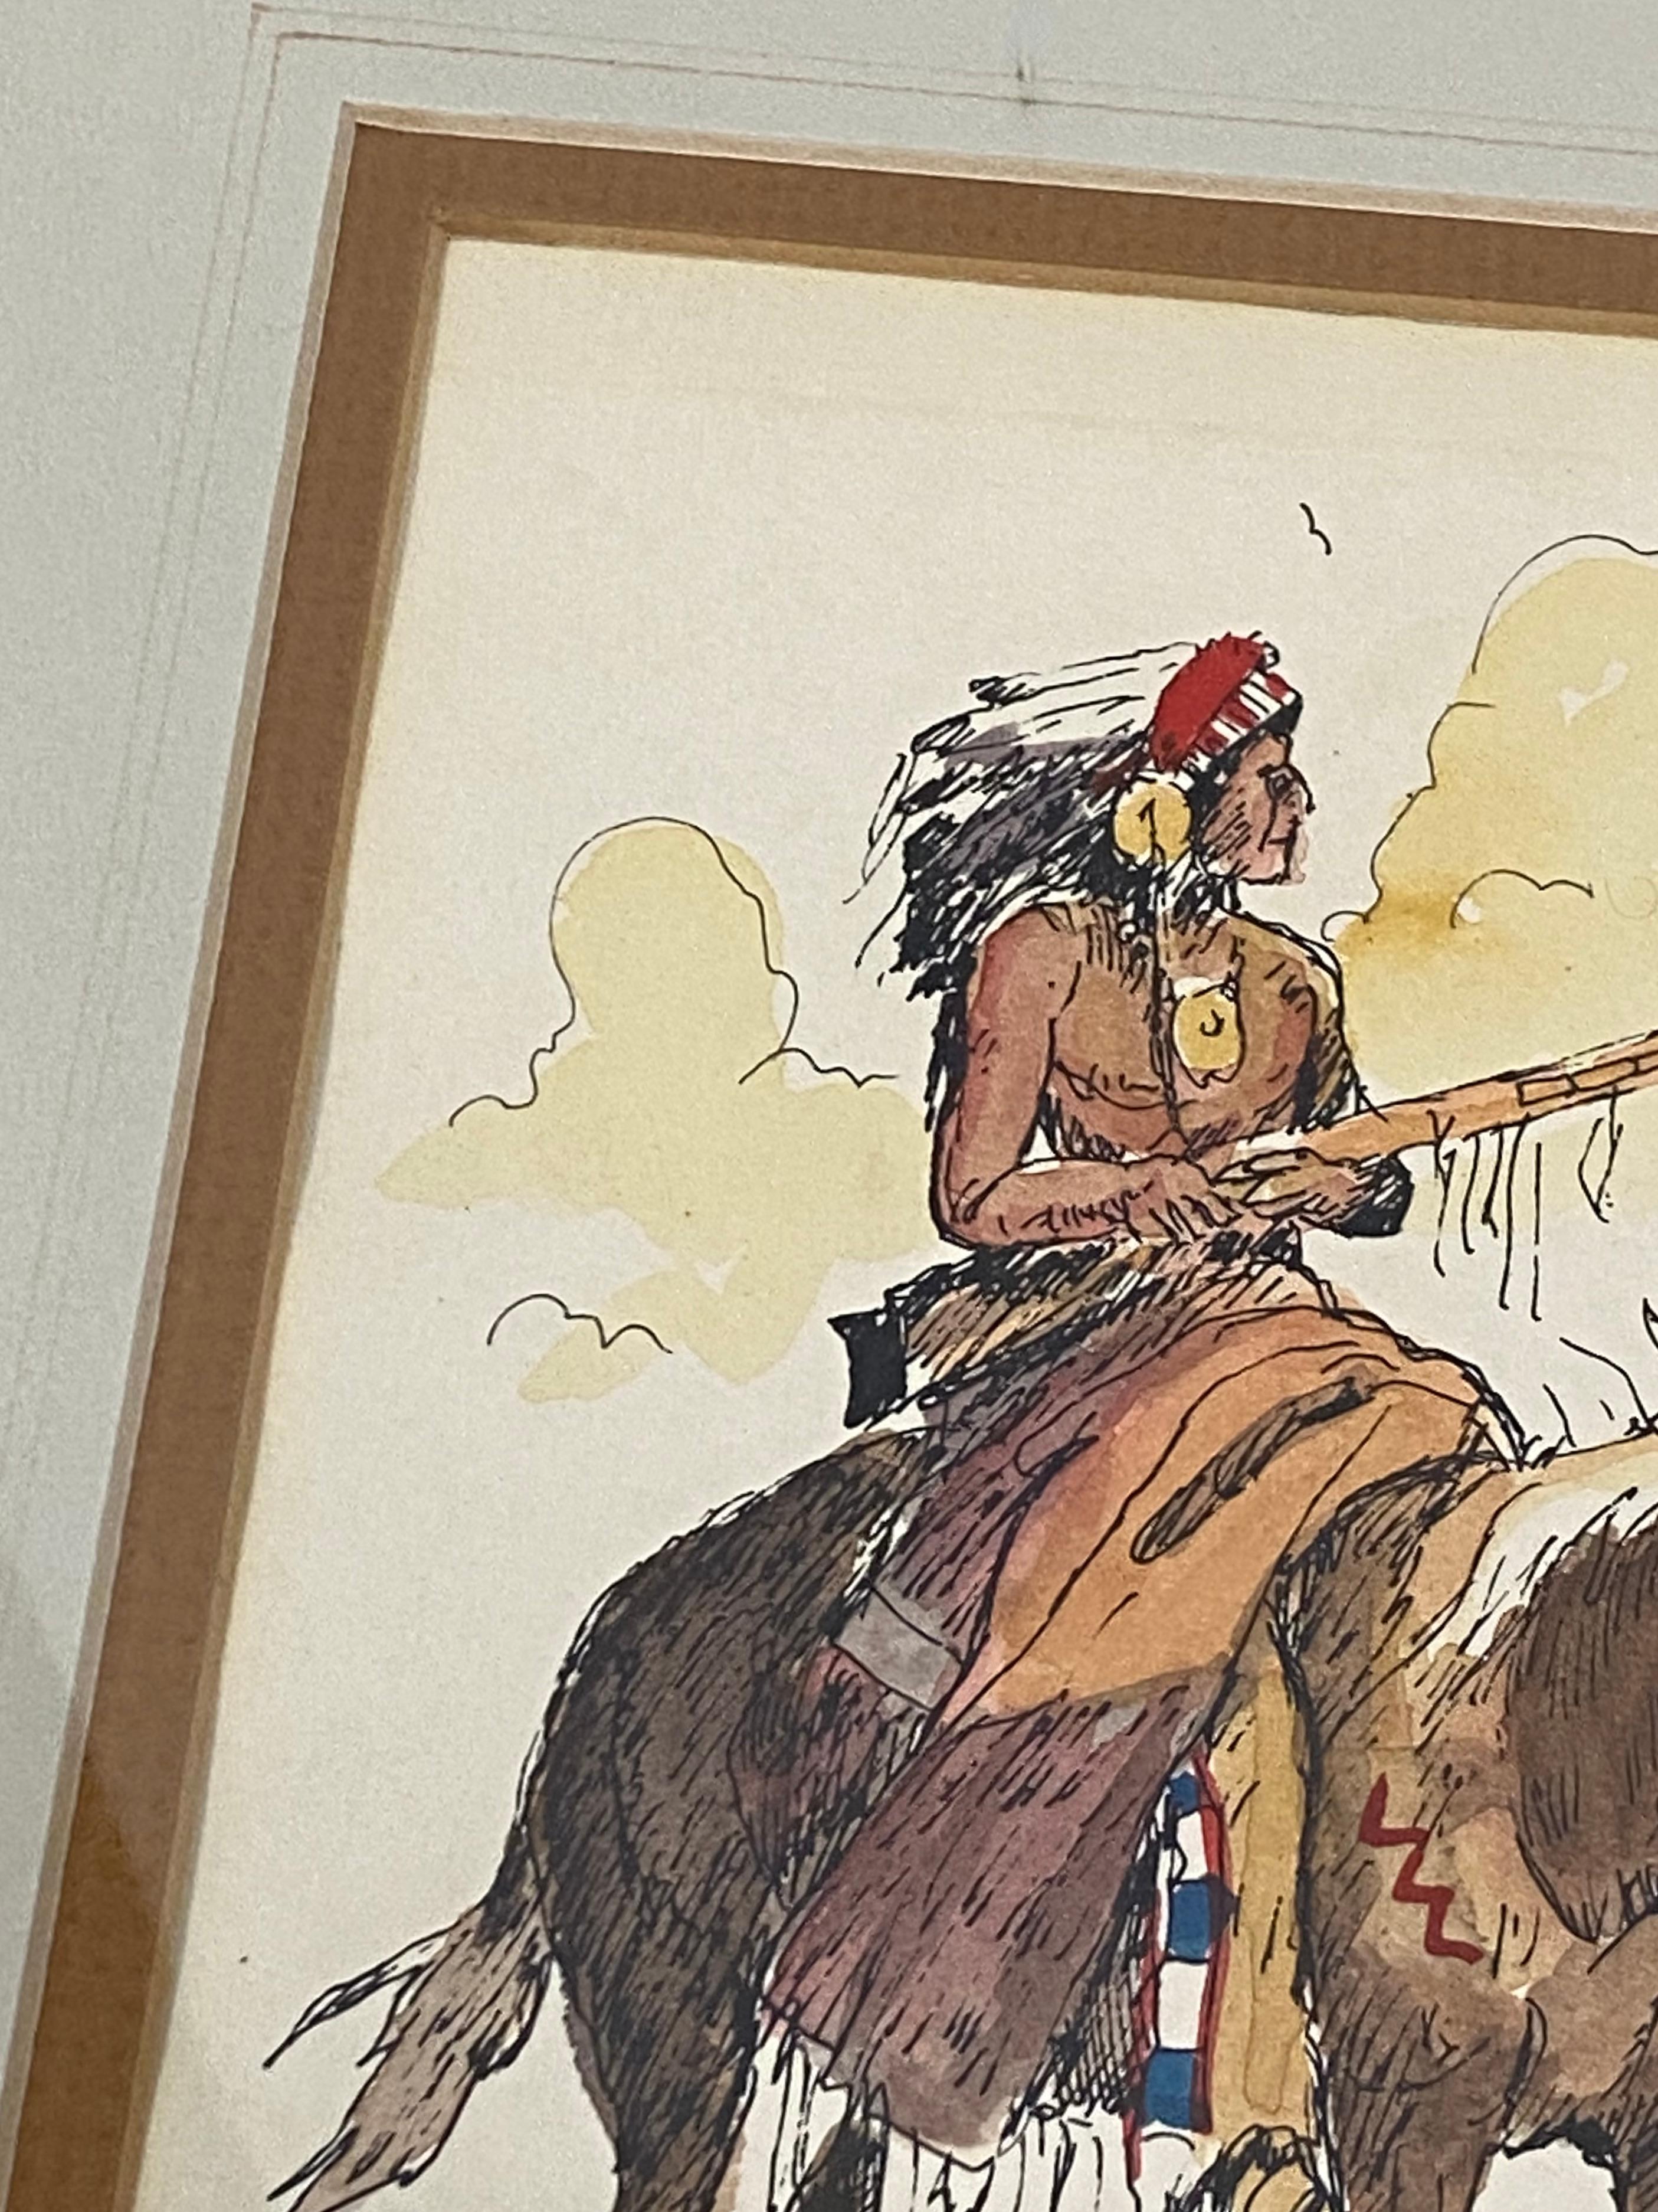 William Zivic Native American Indian on Horseback Original Watercolor c.1985

Watercolor with Pen and Ink on Paper

Dimensions 4.5